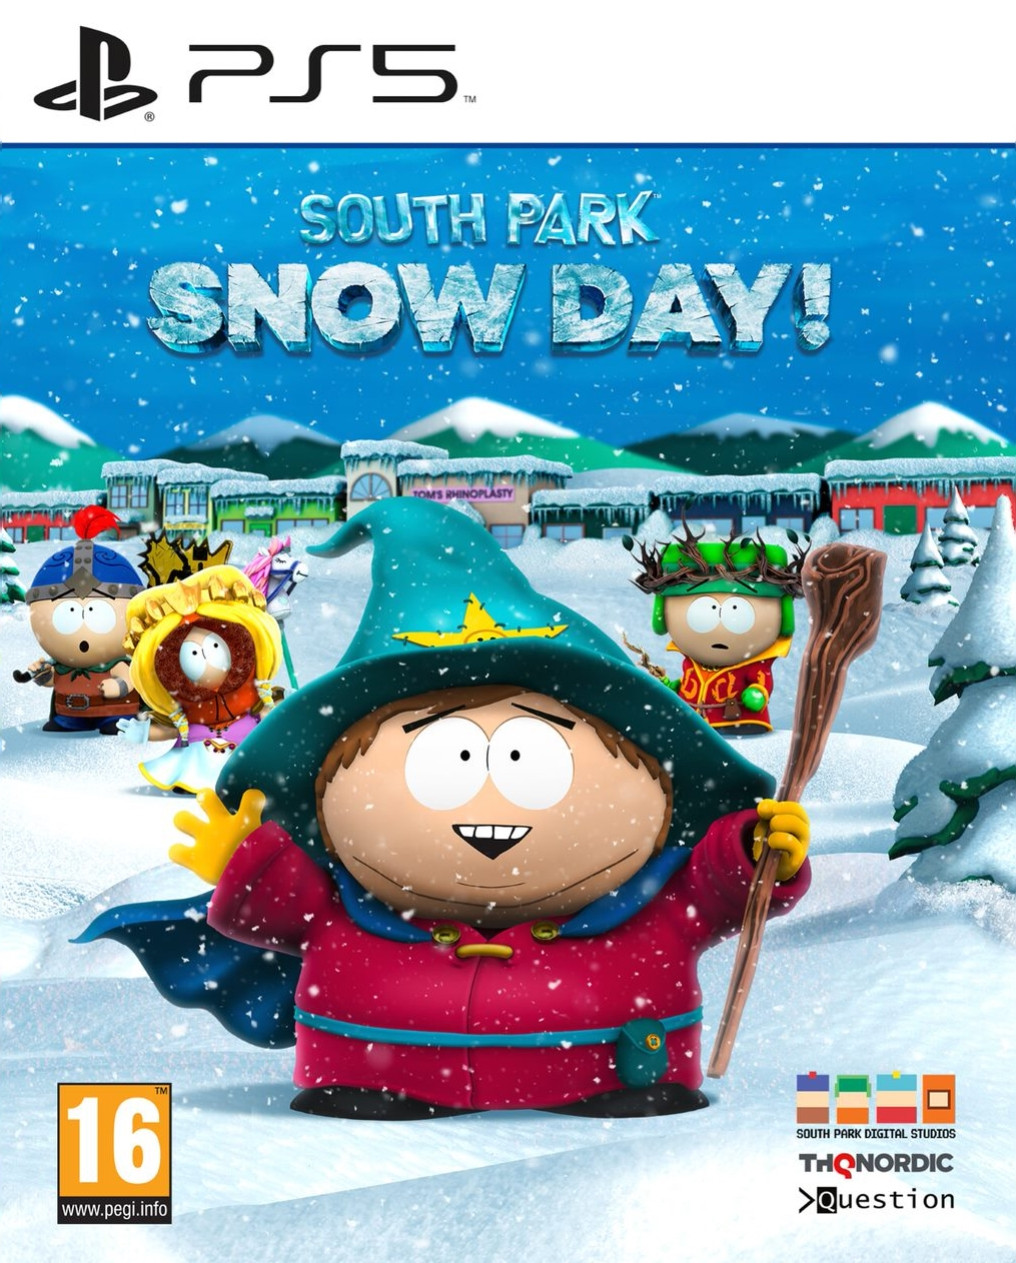 South Park - Snow Day! (PS5), THQ Nordic